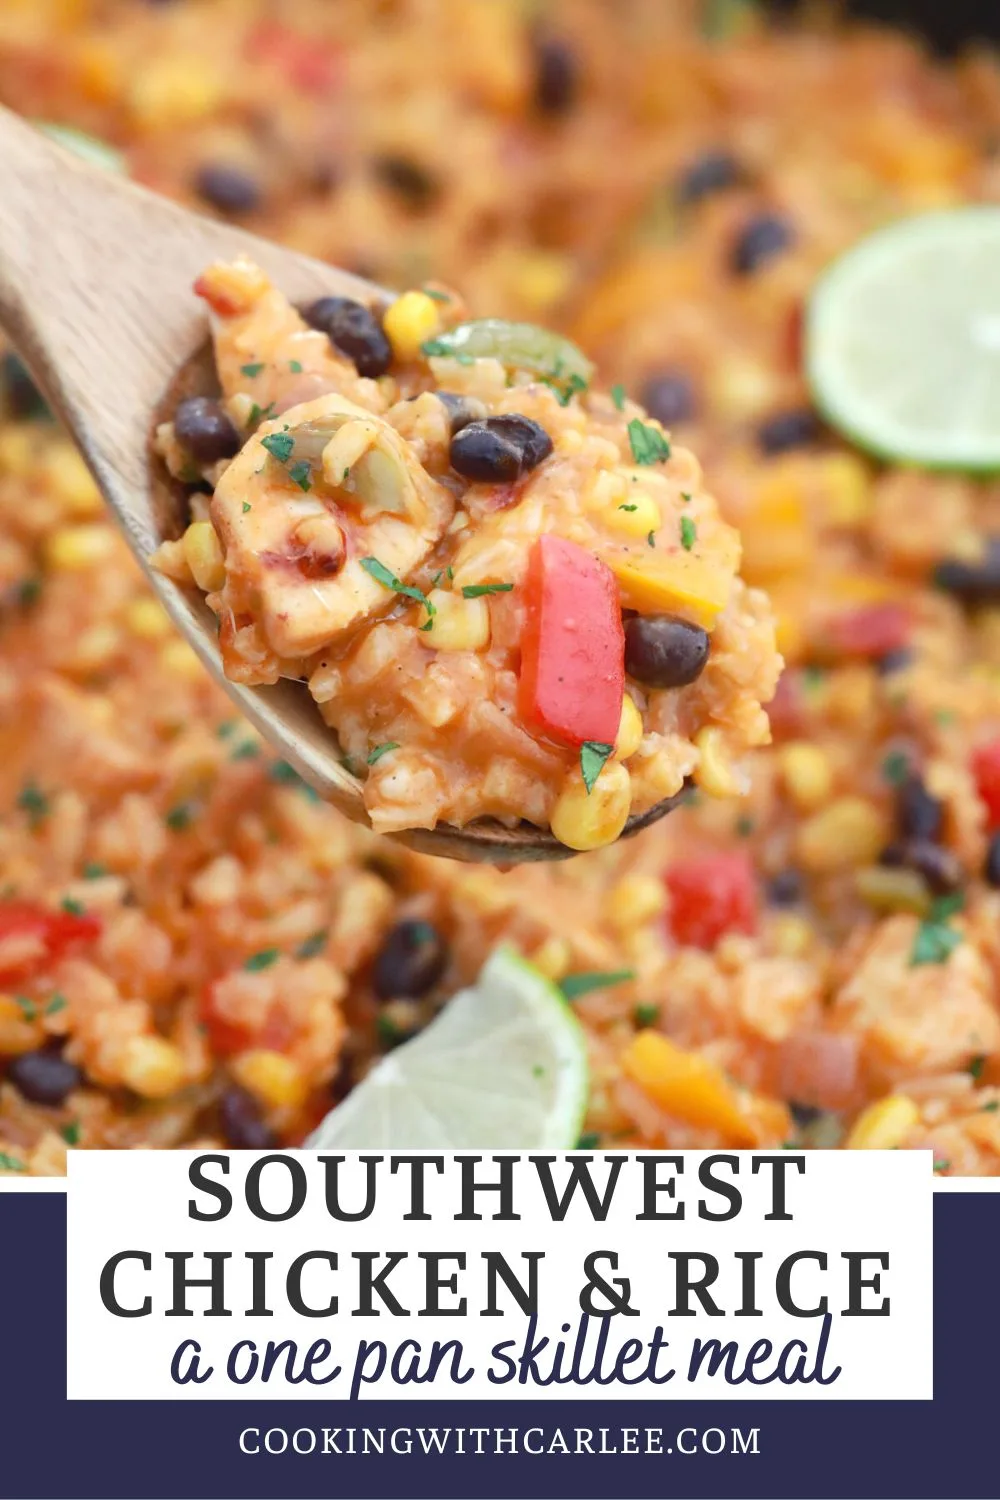 Southwest Chicken is a delicious rice dish with a variety of veggies, spices, and cheese. The juicy chicken soaks up the lime juice, broth, and salsa to give it great flavor.